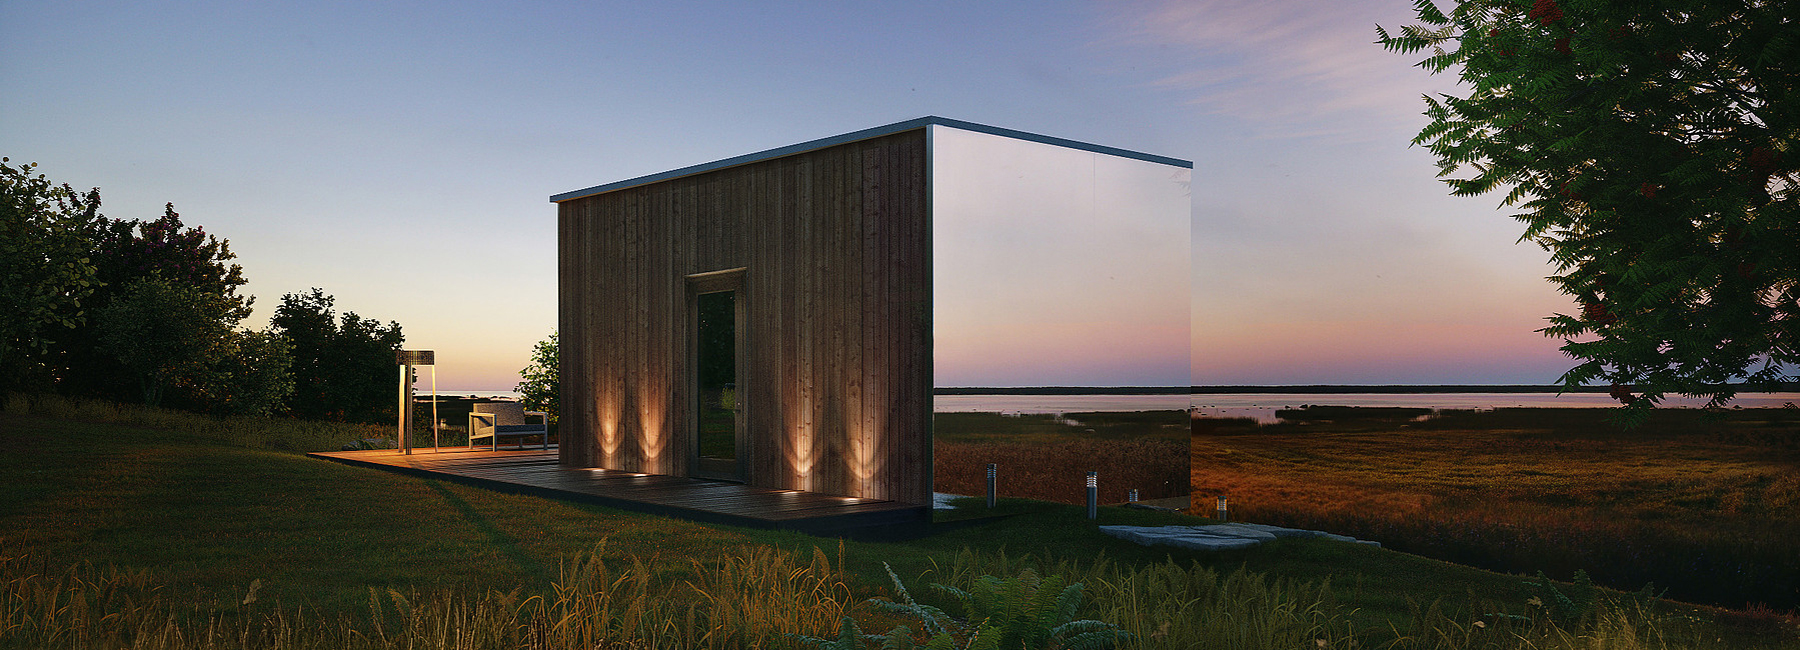 ood - prefab housing - hotel room - sustainable architecture